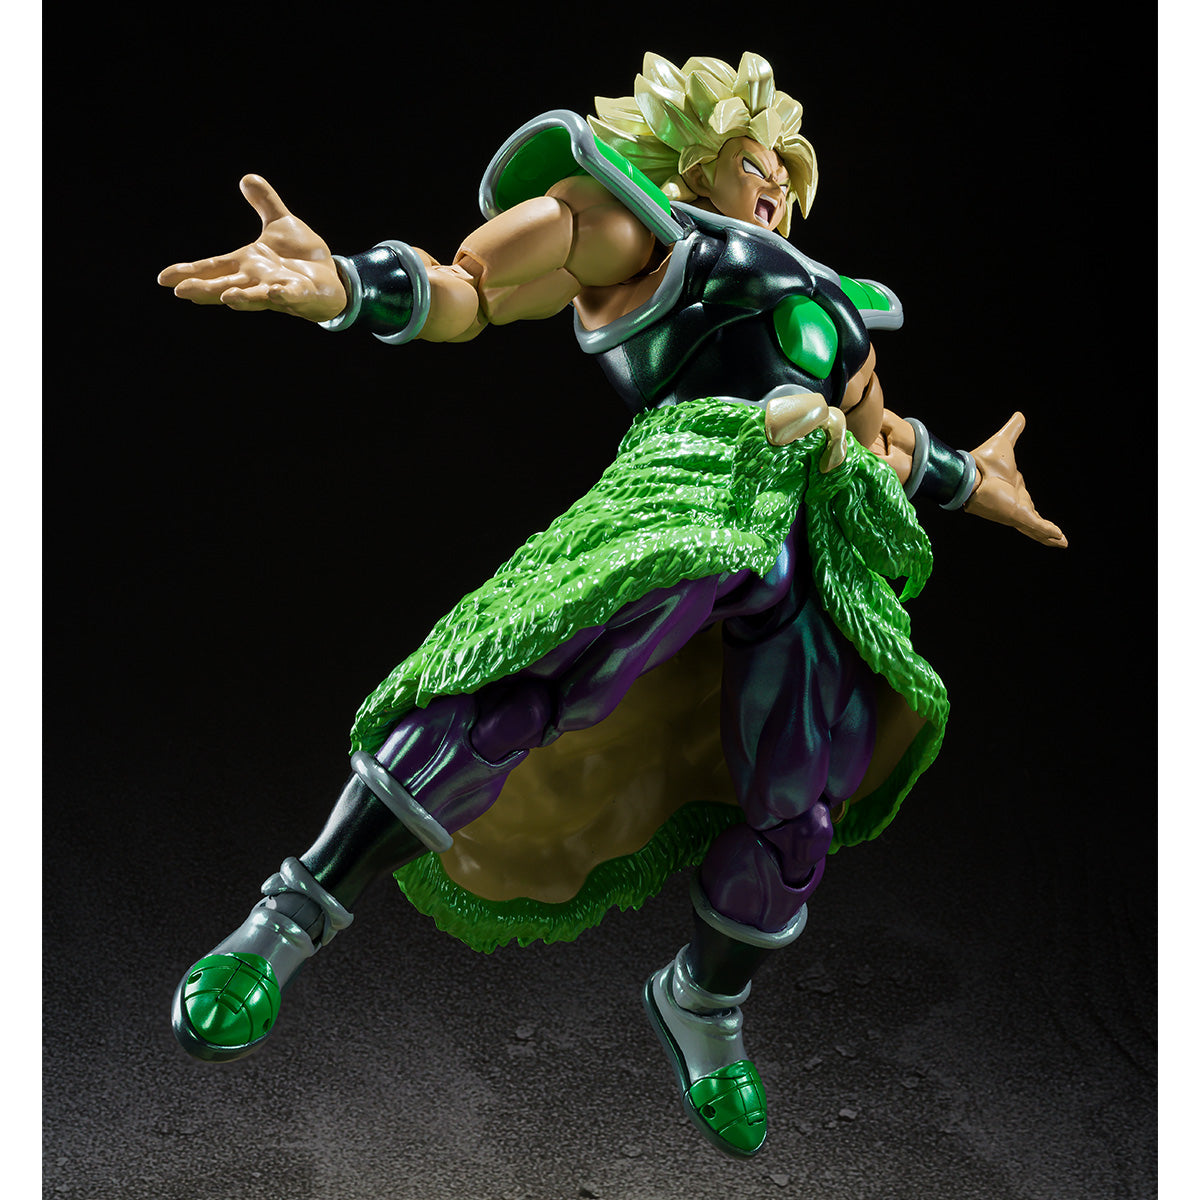 SH Figurats Premium Bandai US exclusive -The Super Saiyan Broly, as seen in “Dragon Ball Super: Broly,” comes to NYCC in a special limited edition with an aura effect part! The aura effect is molded in translucent pearlescent plastic to replicate the scene of Broly powering up.